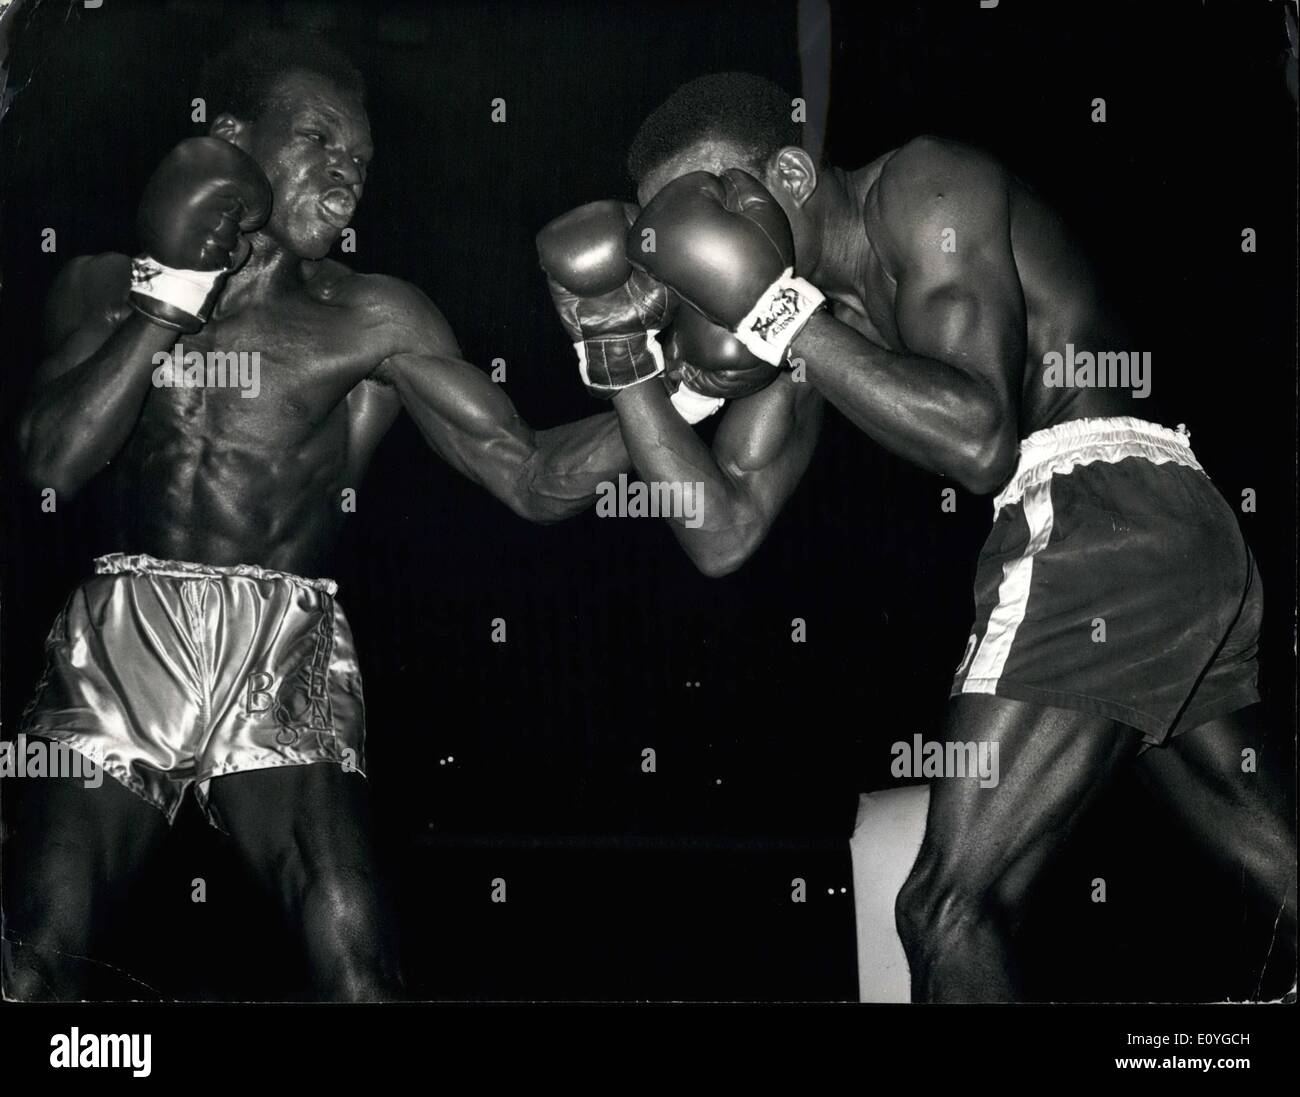 Apr. 04, 1970 - Sterling's Winning way. London: Jamaican-born British and Commonwealth Middleweight champion Bunny Sterling ( left ) gets through the guard of bill ''DYNAMITE'' DOUGLAS, of Columbus, Ohio, during their LO-round Middleweight out at the Royal Albert Hall late 4/27. Sterling outclassed the American to win on Point. Stock Photo